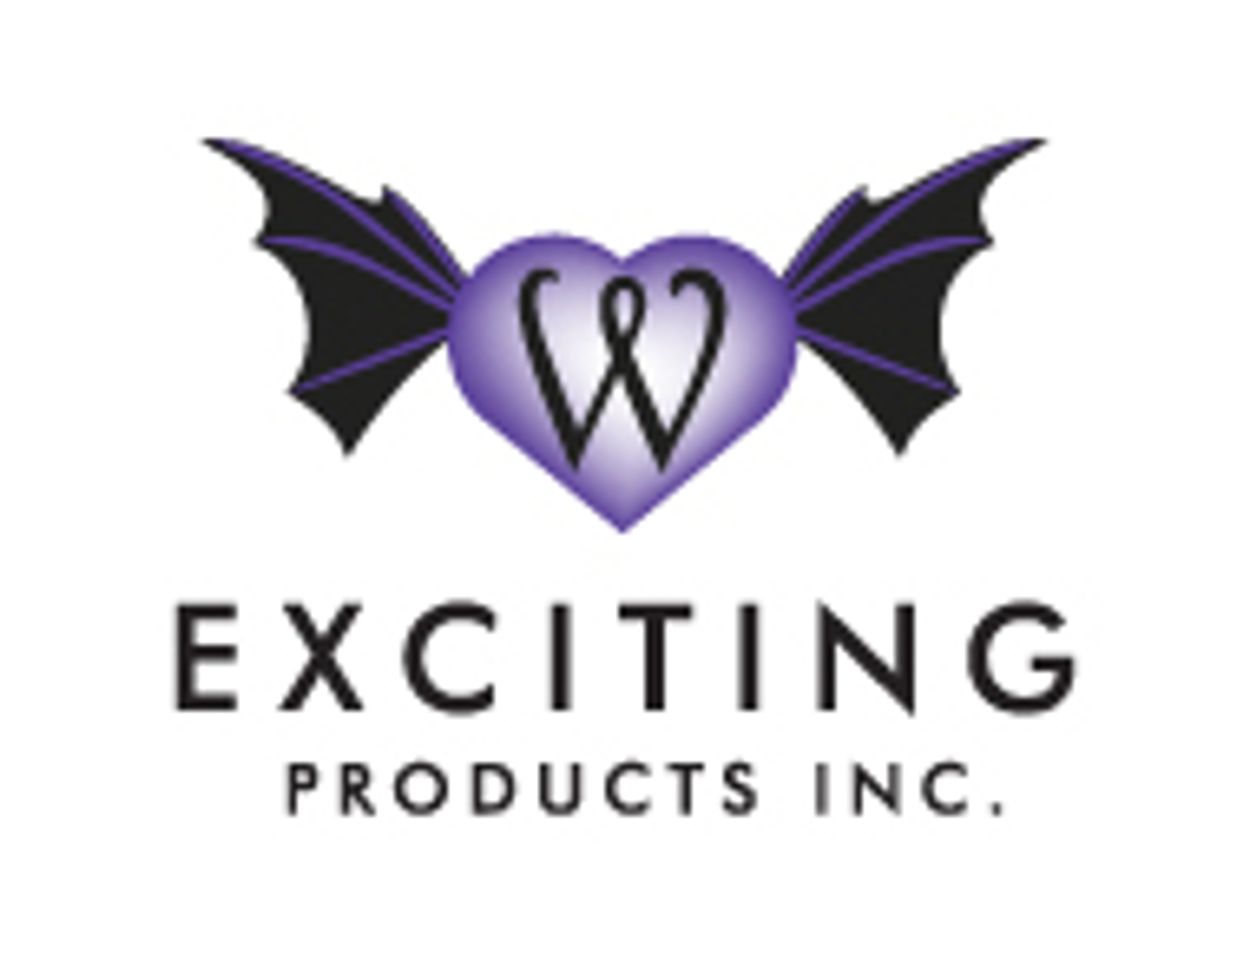 Exciting Products Inc. Enters Into New Partnership